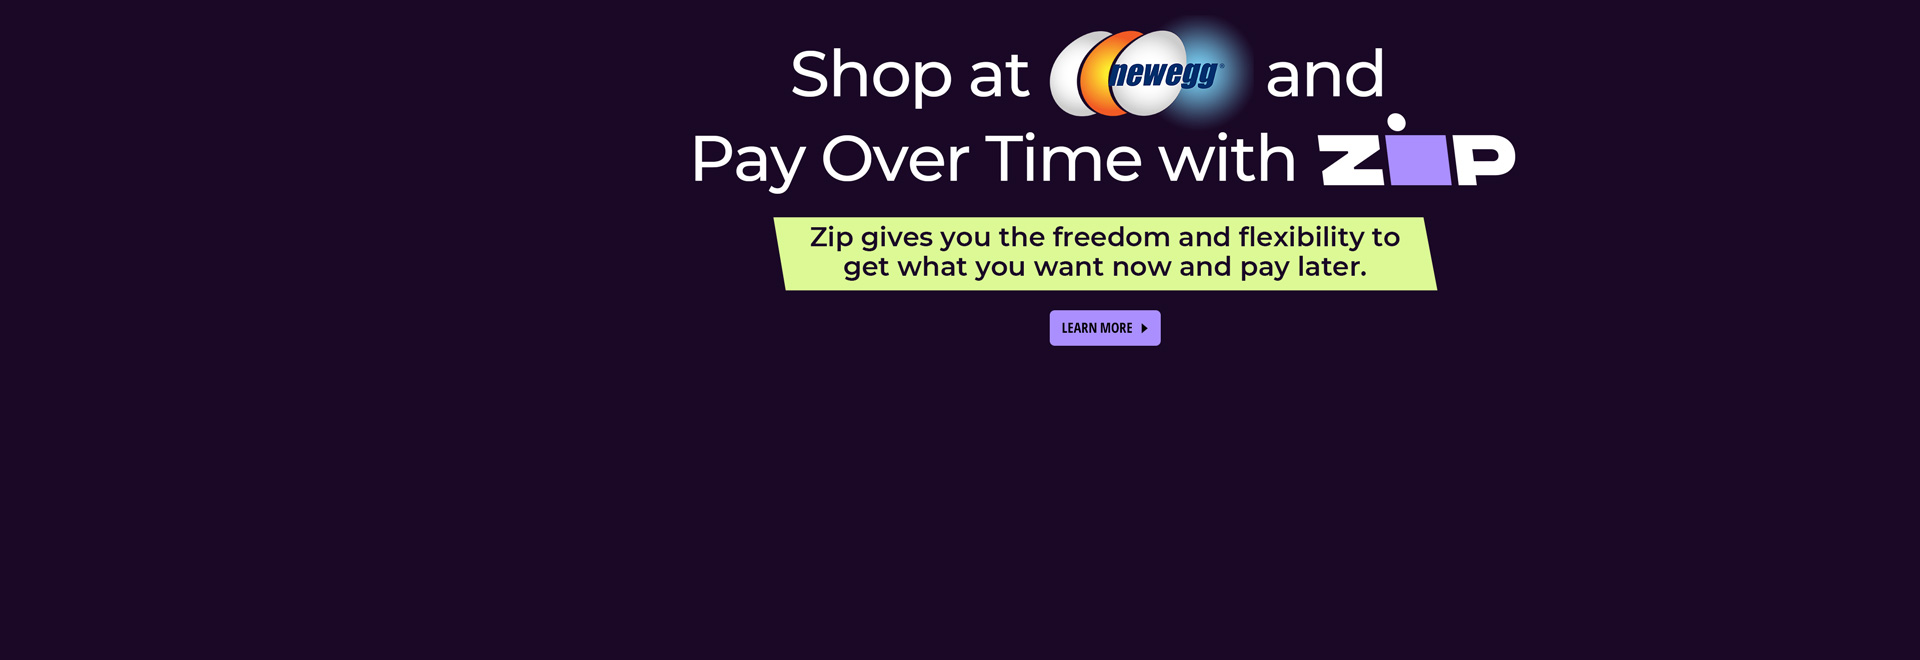 Shop at Newegg and Pay Over Time with ZIP